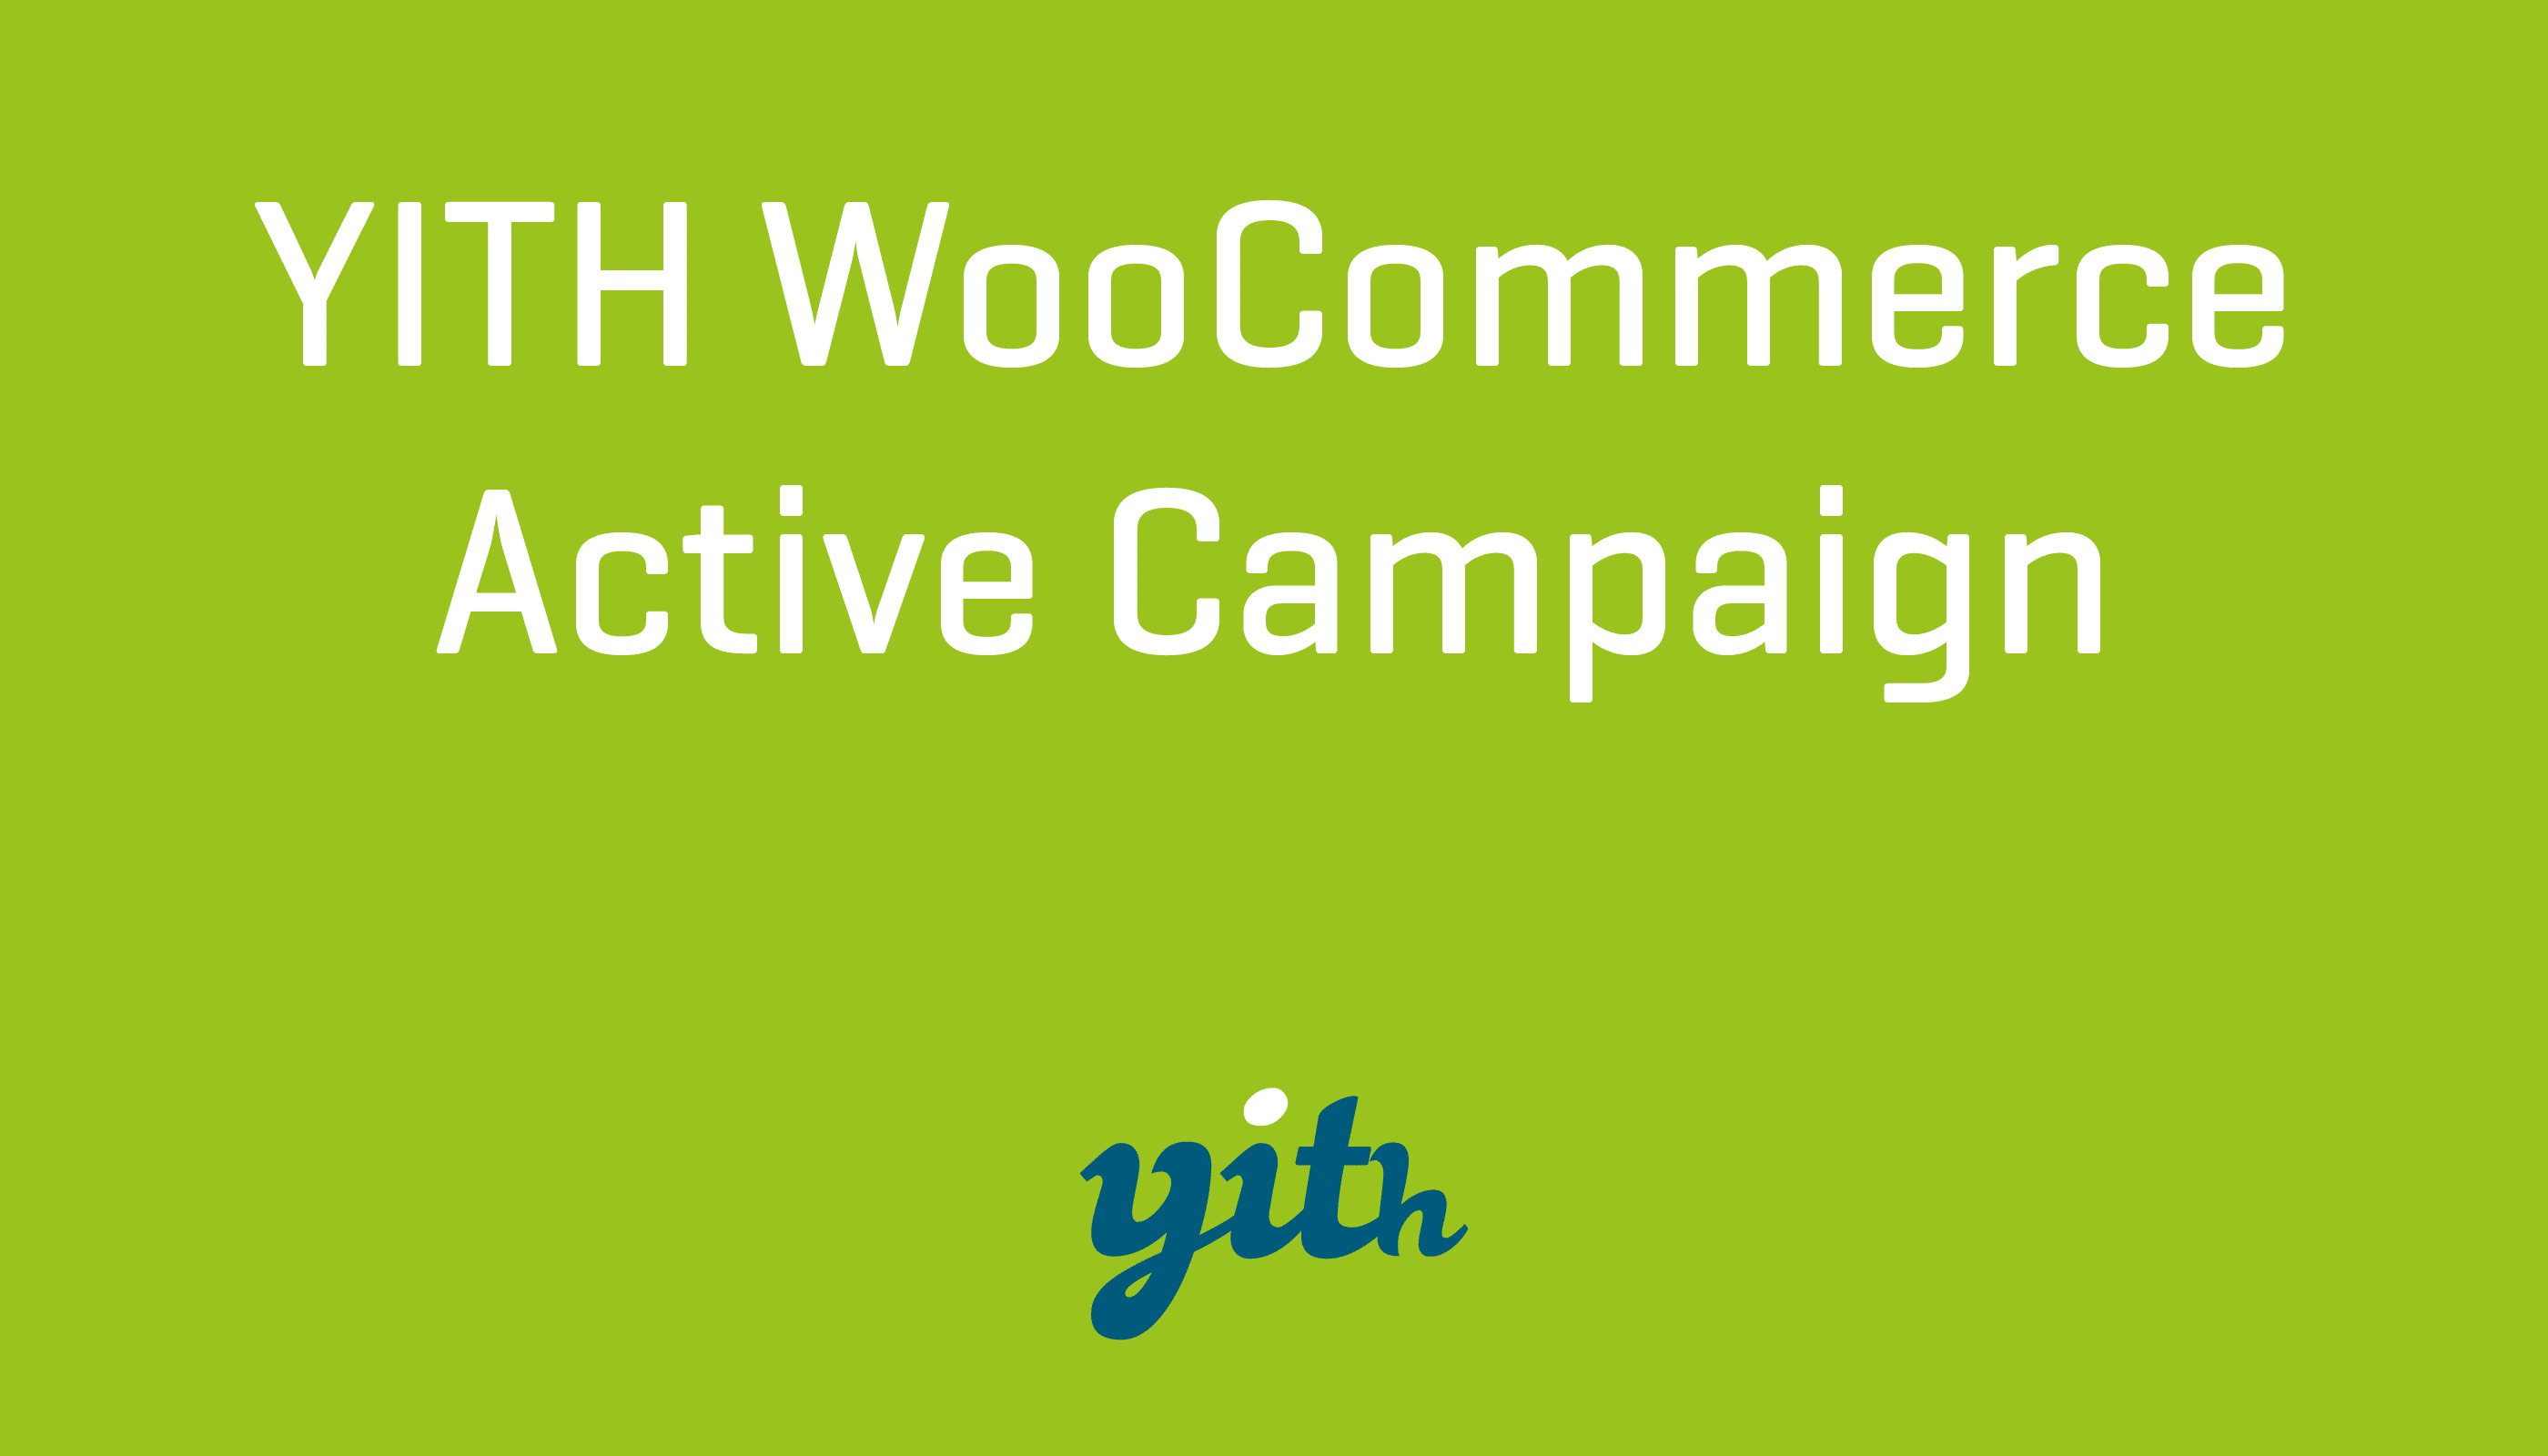 YITH Active Campaign For WooCommerce Premium